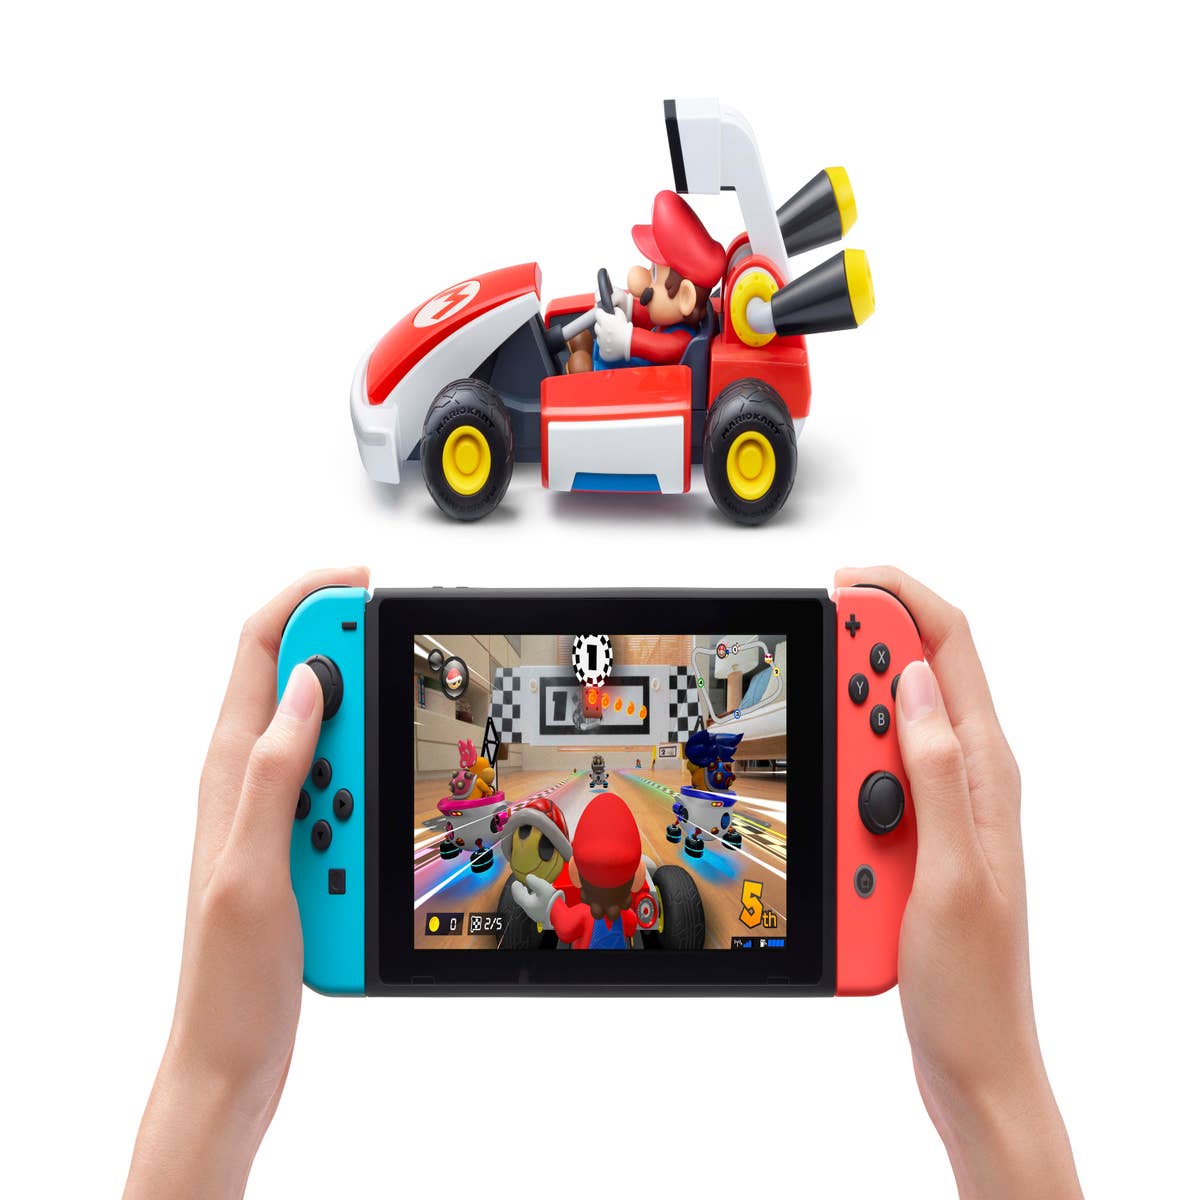 Mario Kart Live Home Circuit review - a glorious toy hemmed in by a few key  restrictions